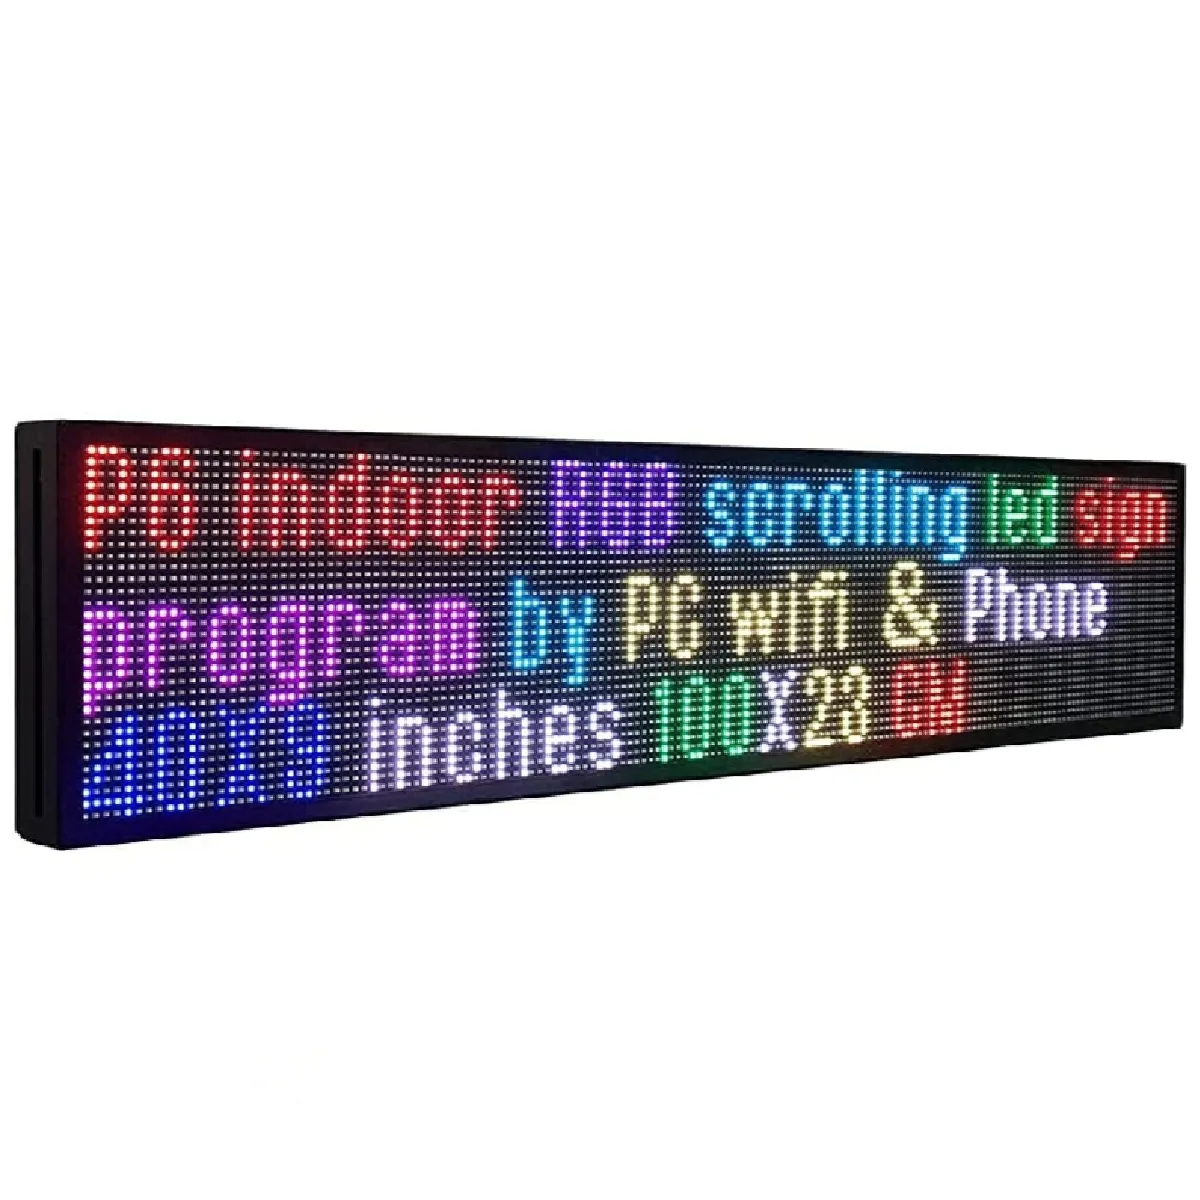 Illuminated Matrix Display Screen Outdoor Indoor Programmable Custom Commercial Led Sign Board for Taxi Window Business Store